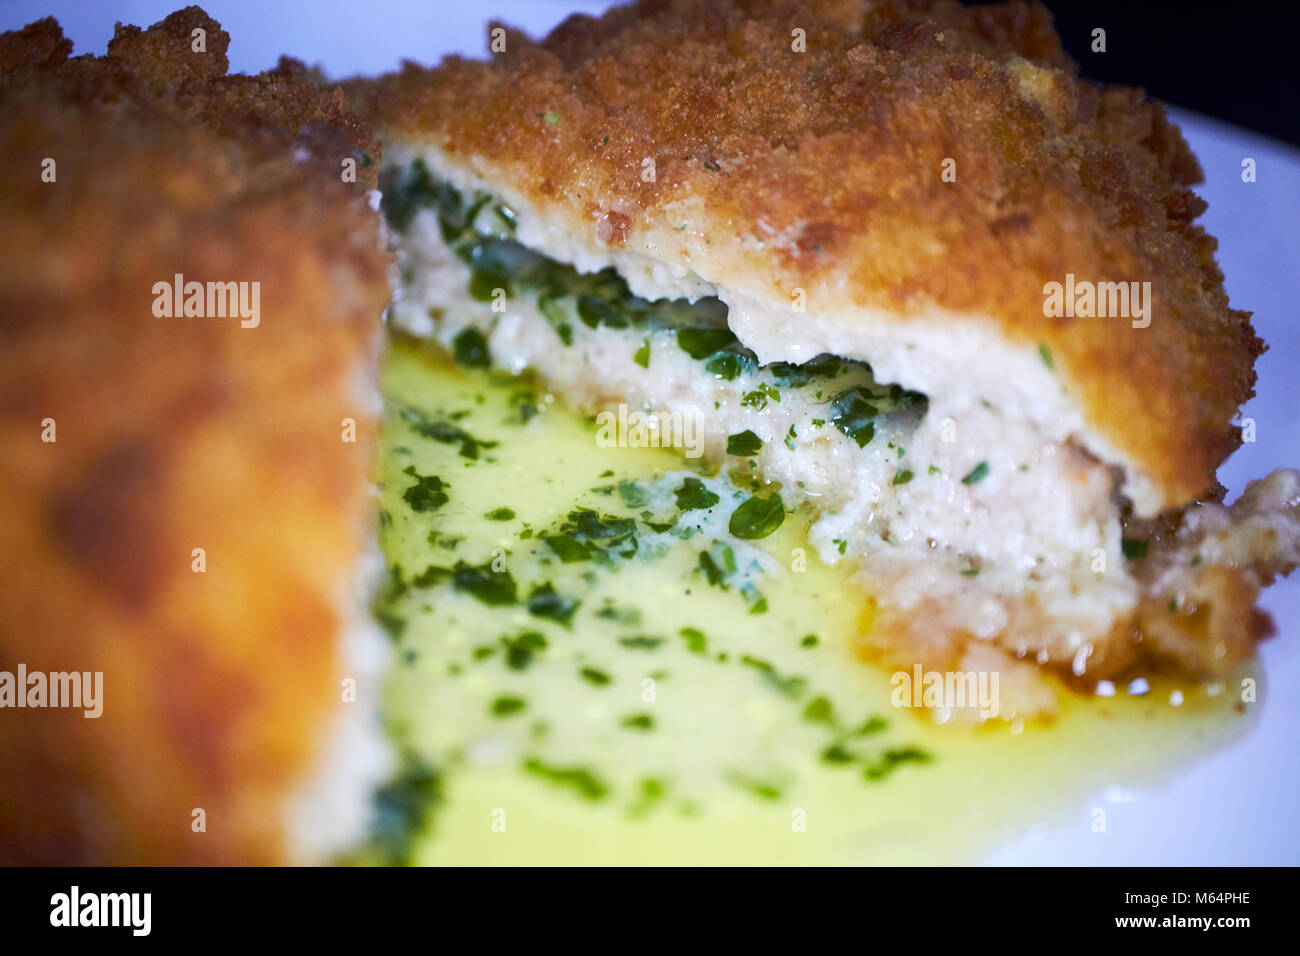 cross section of cut through chicken kiev with garlic and herbs Stock Photo